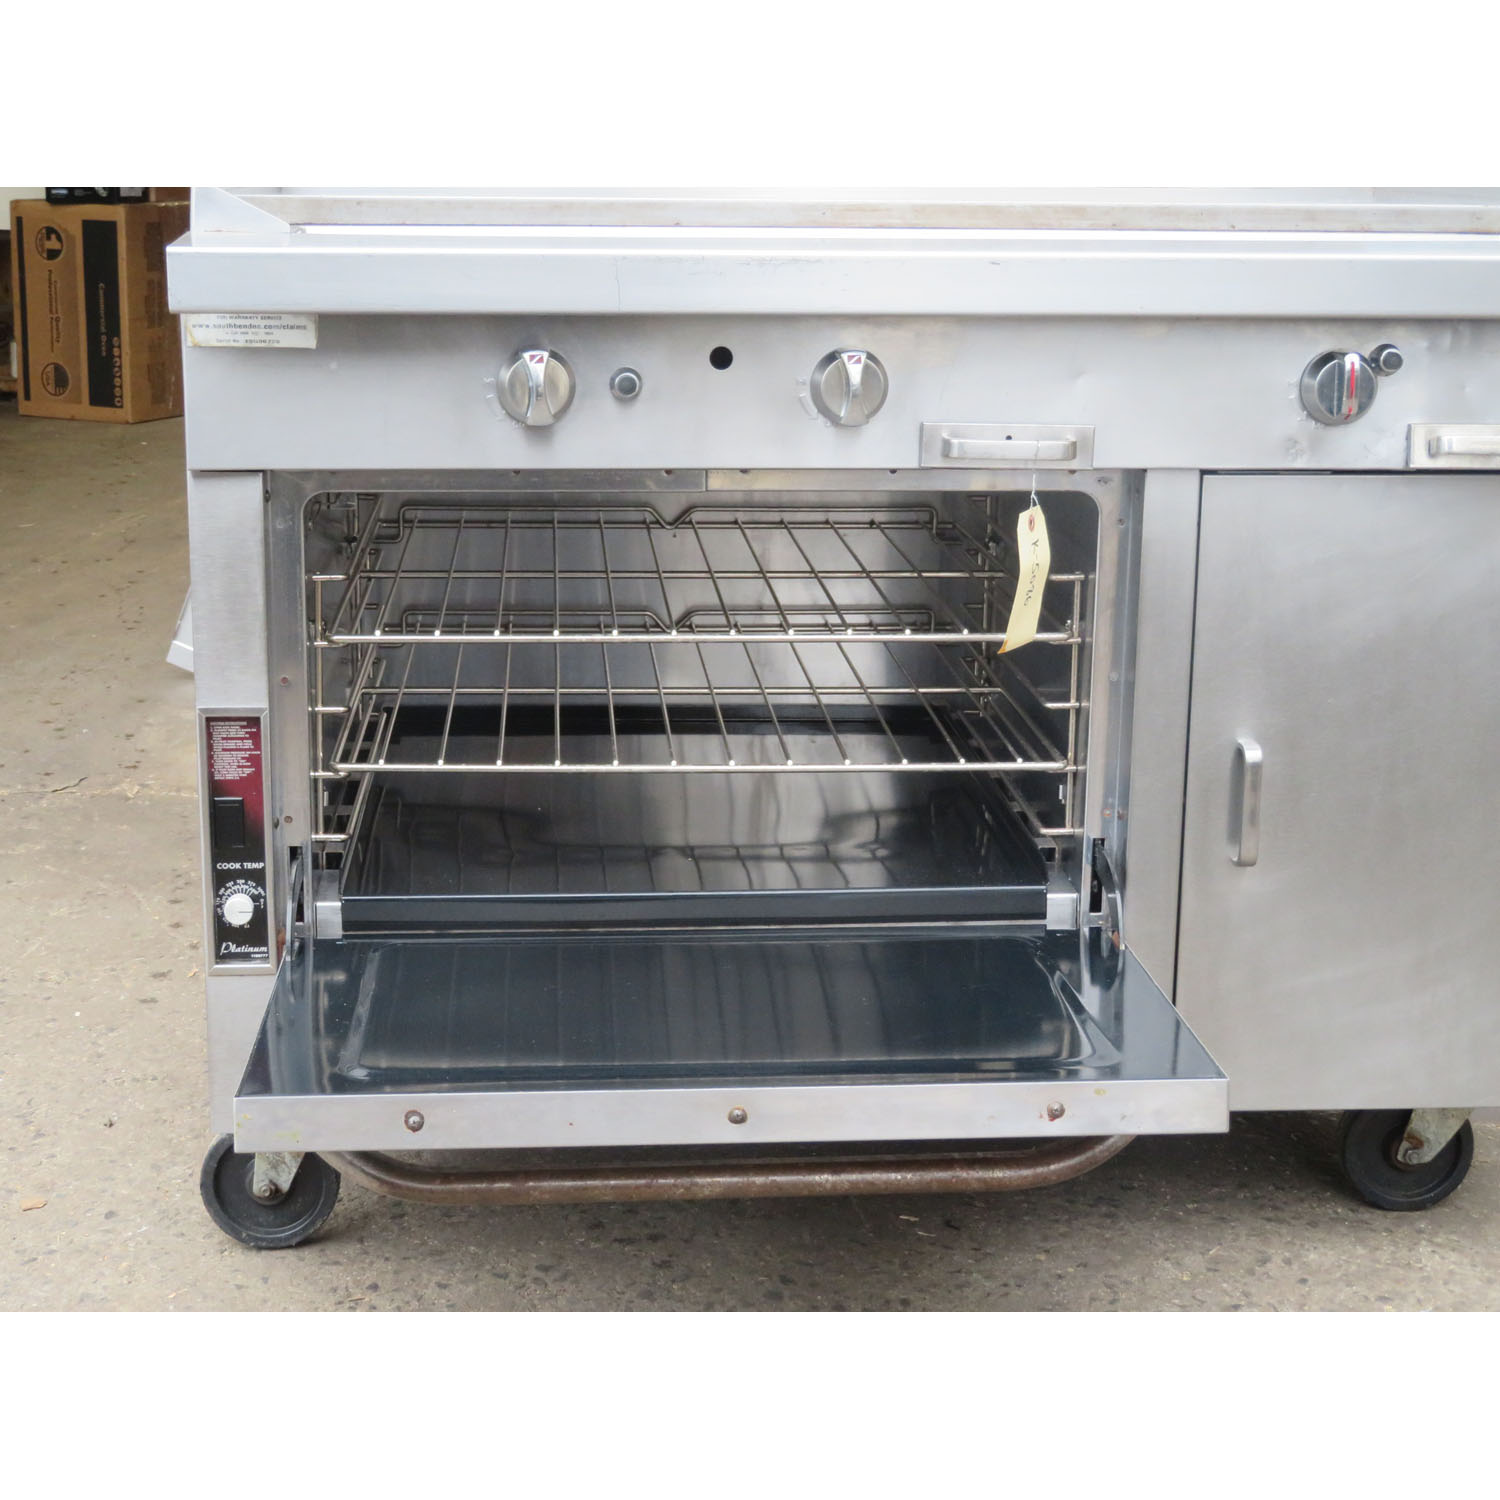 Southbend P48D-GG 48" Griddle W/Bottom Oven, Used Excellent Condition image 2